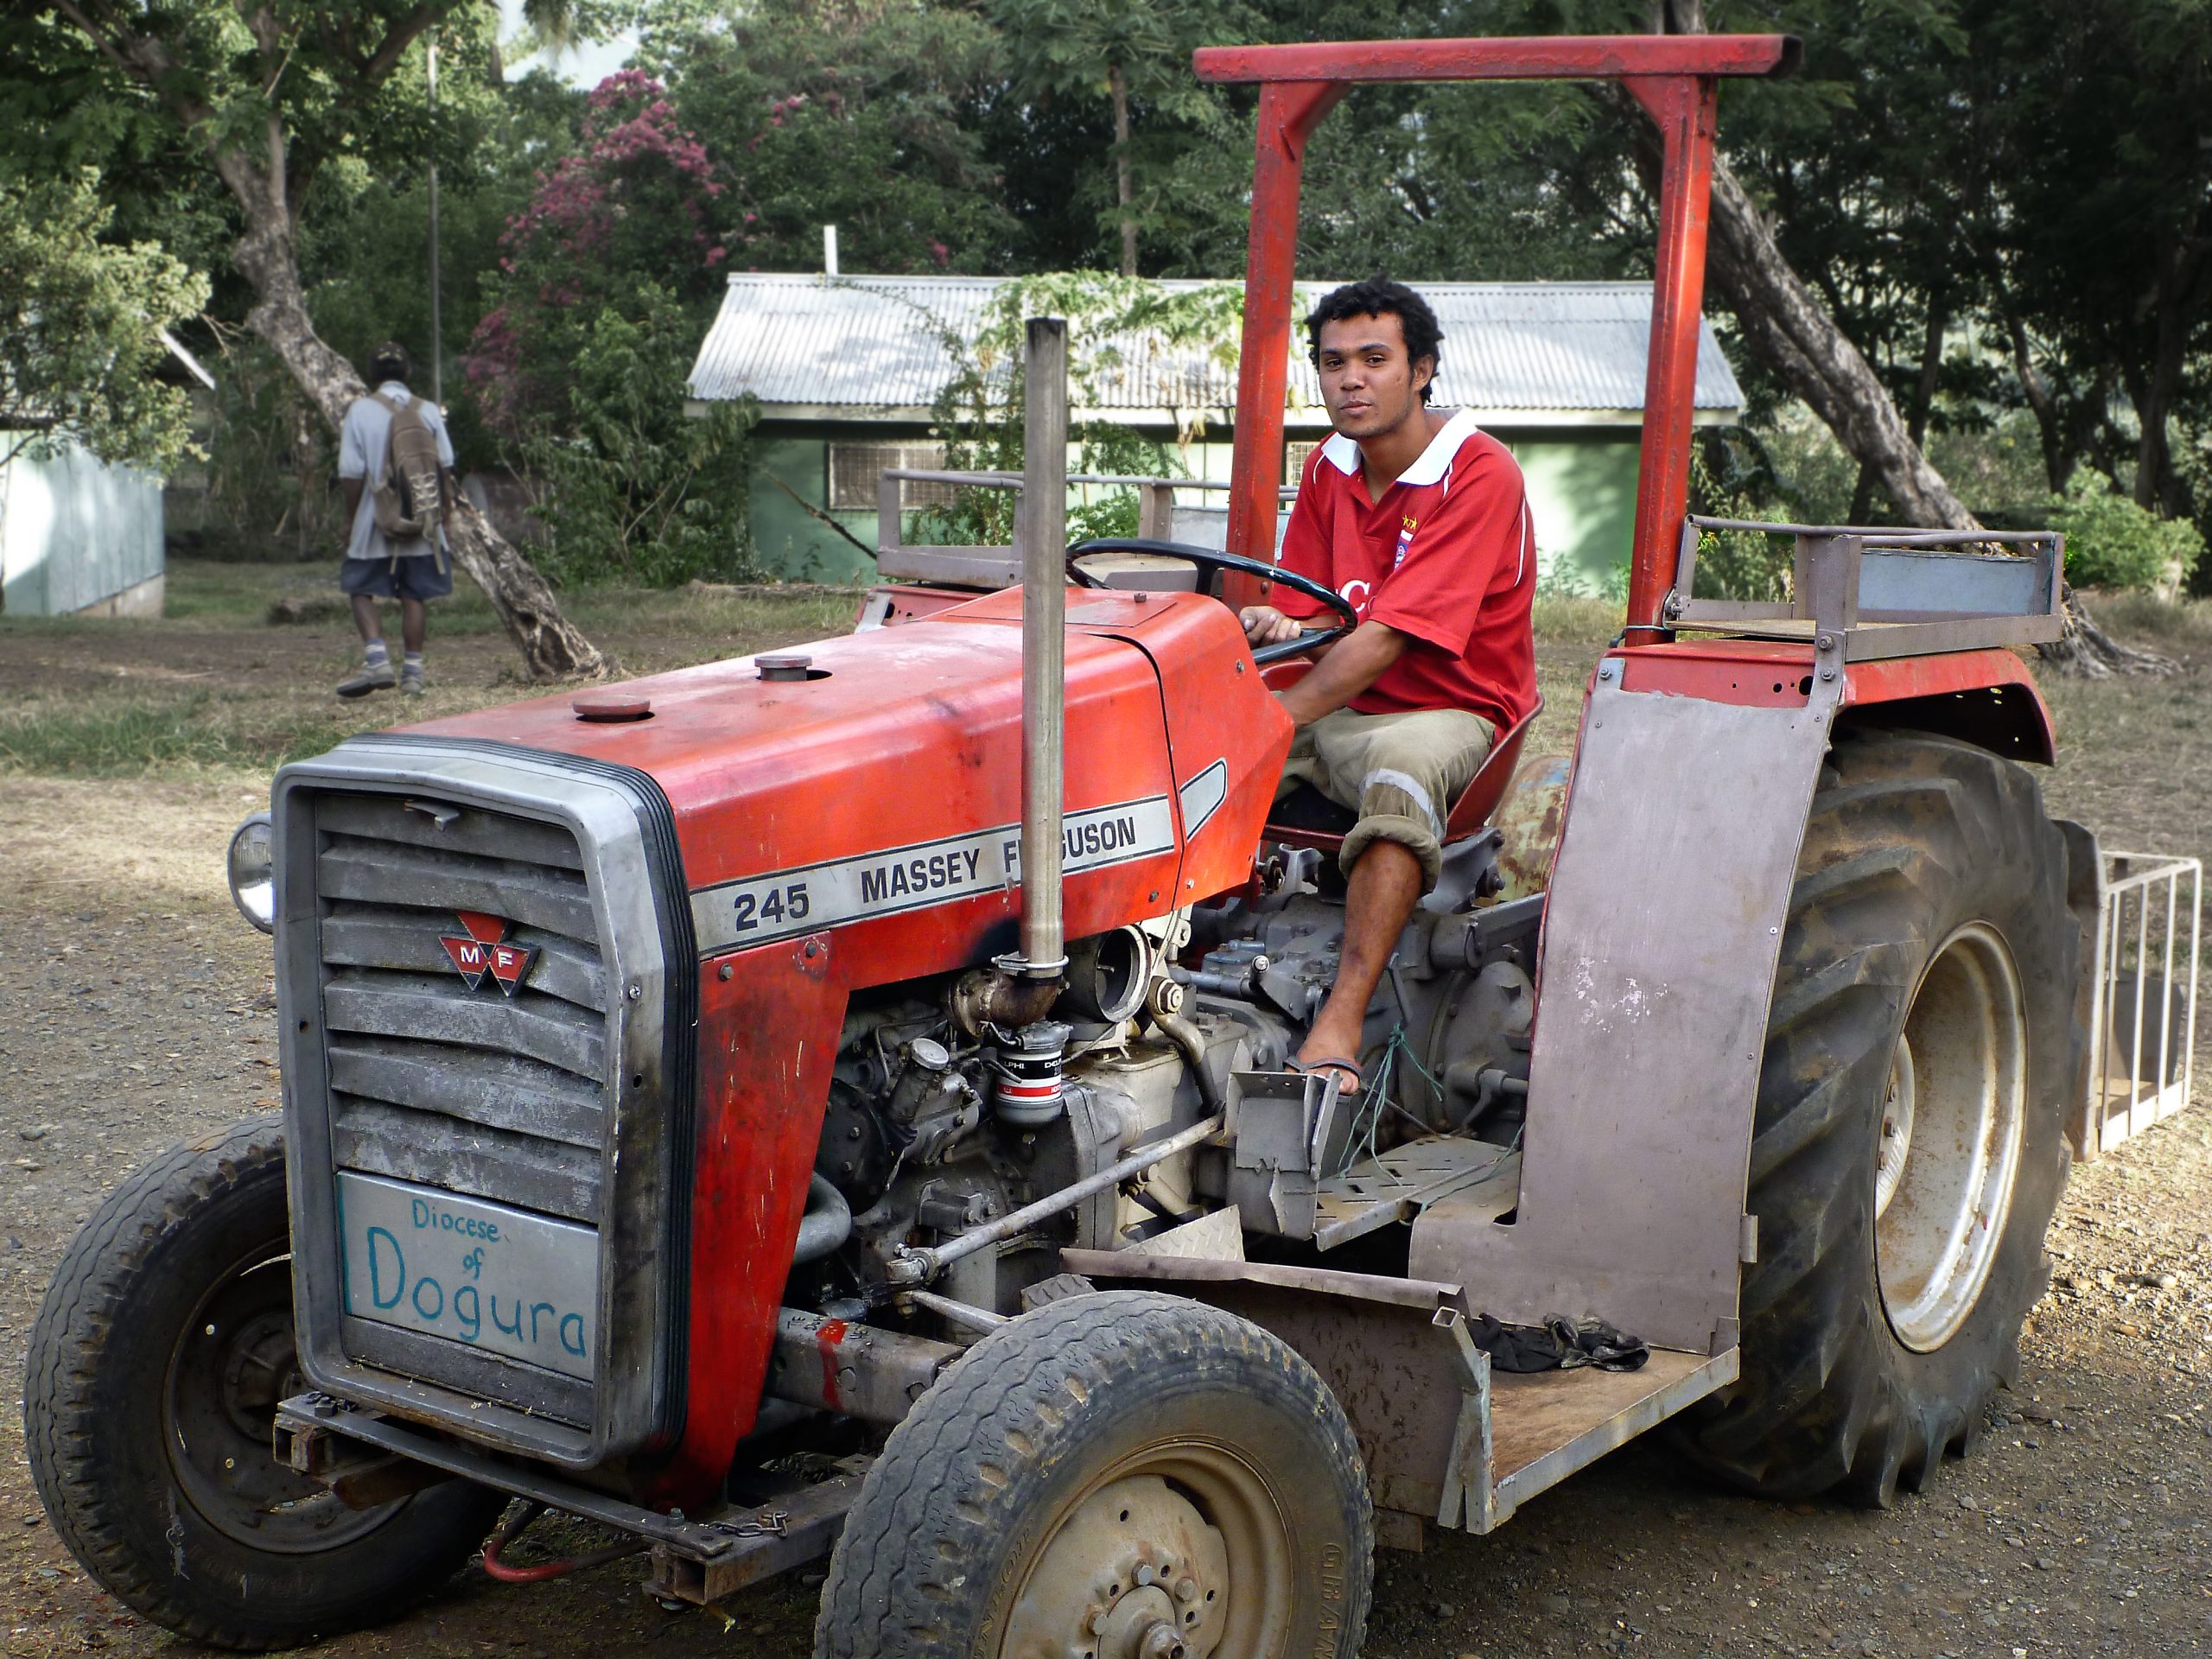 A person on a red tractor